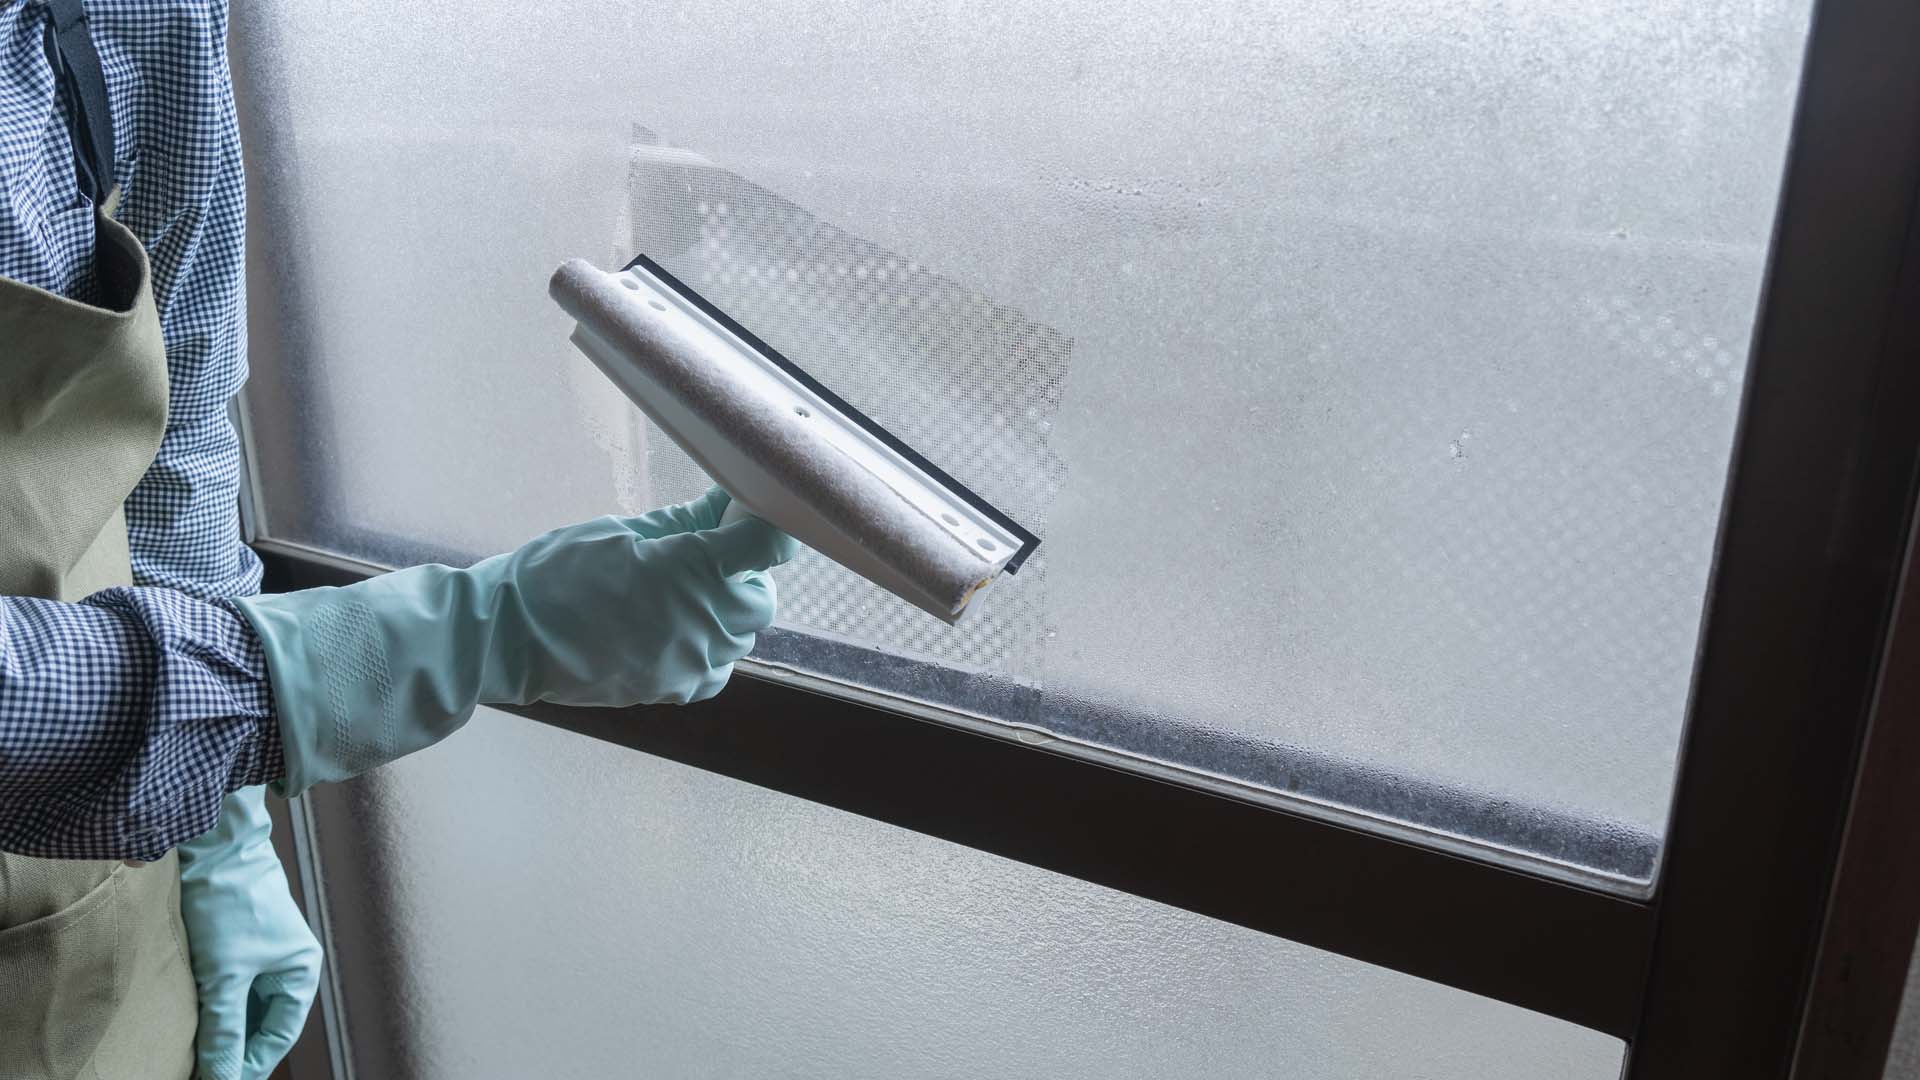 A oerson cleaning condensation off a window with a squeegee